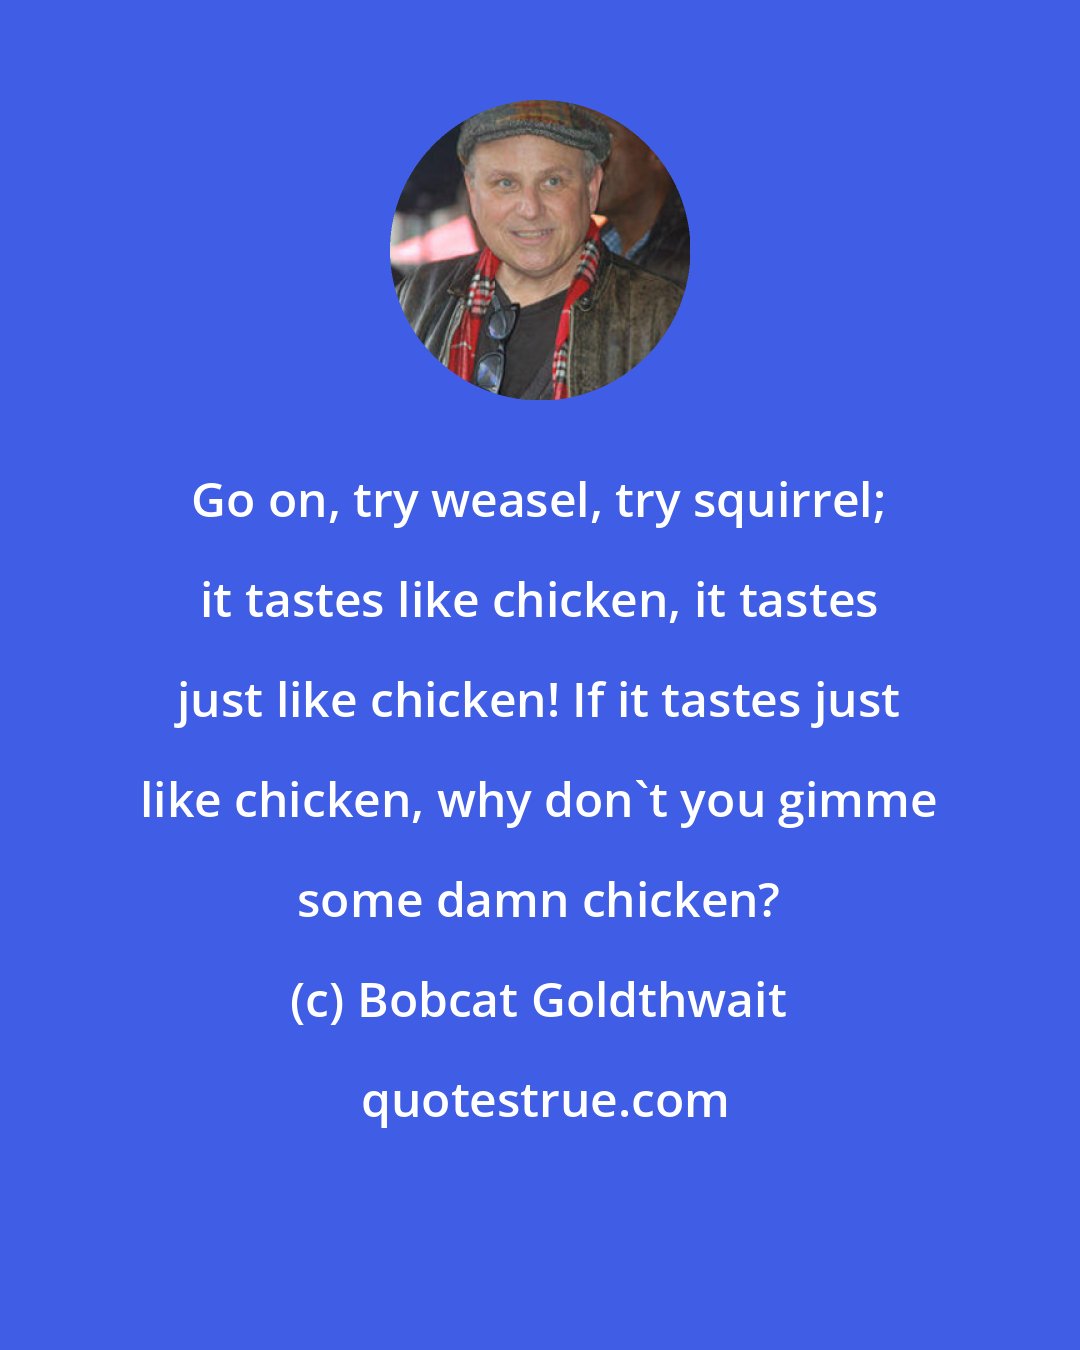 Bobcat Goldthwait: Go on, try weasel, try squirrel; it tastes like chicken, it tastes just like chicken! If it tastes just like chicken, why don't you gimme some damn chicken?